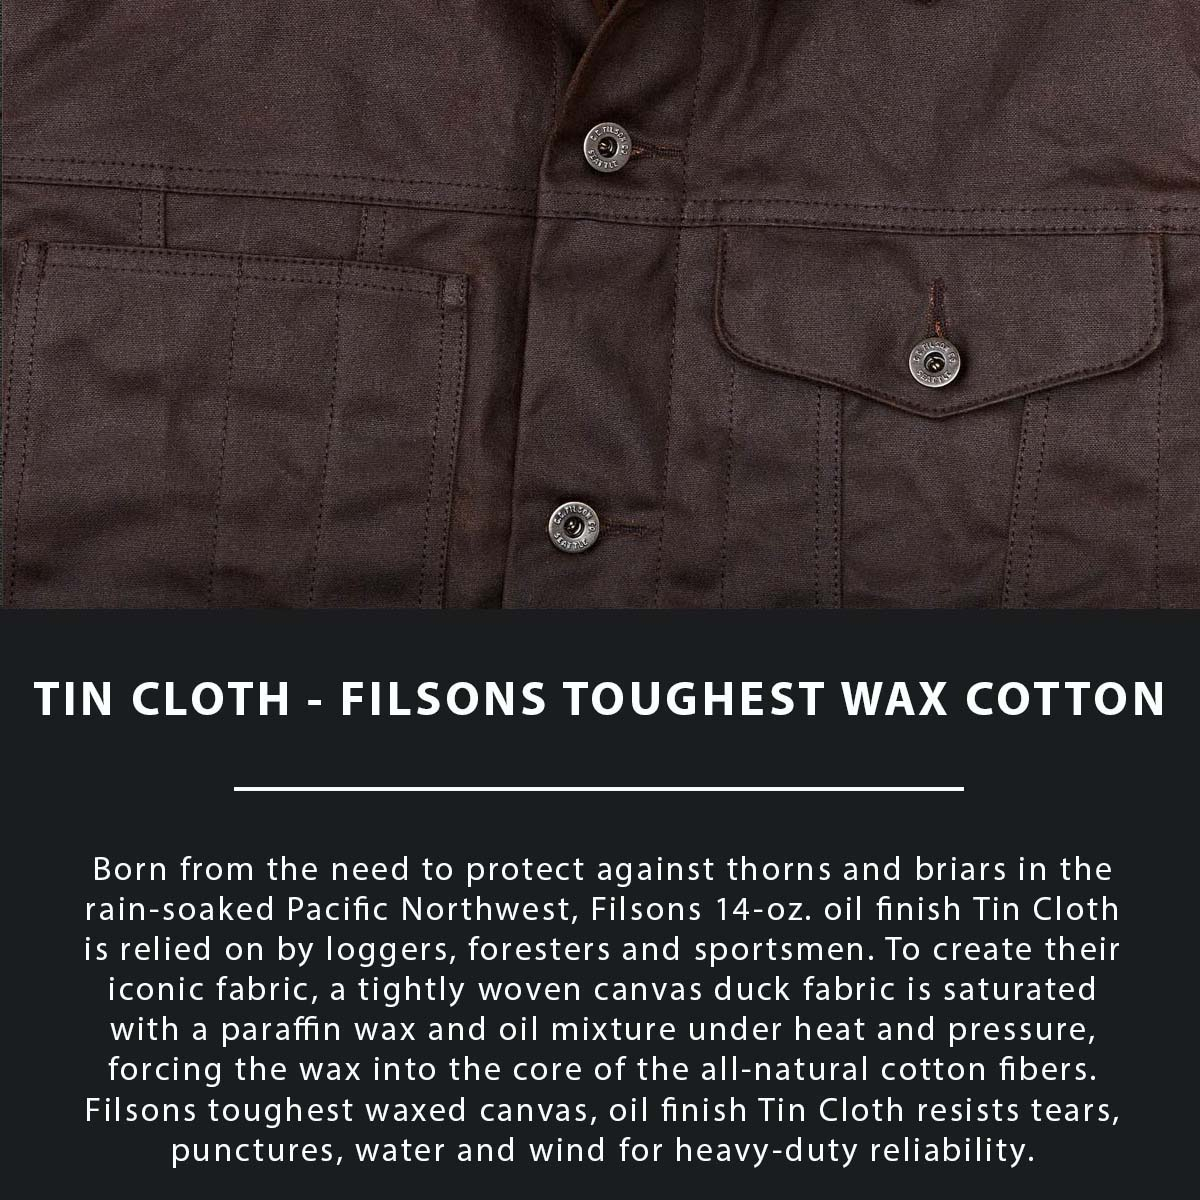 Filson Tin Cloth Short Lined Cruiser Jacket Dark Brown, made of the legendary super strong, lightweight, and oil impregnated 14-oz. Tin Cloth canvas